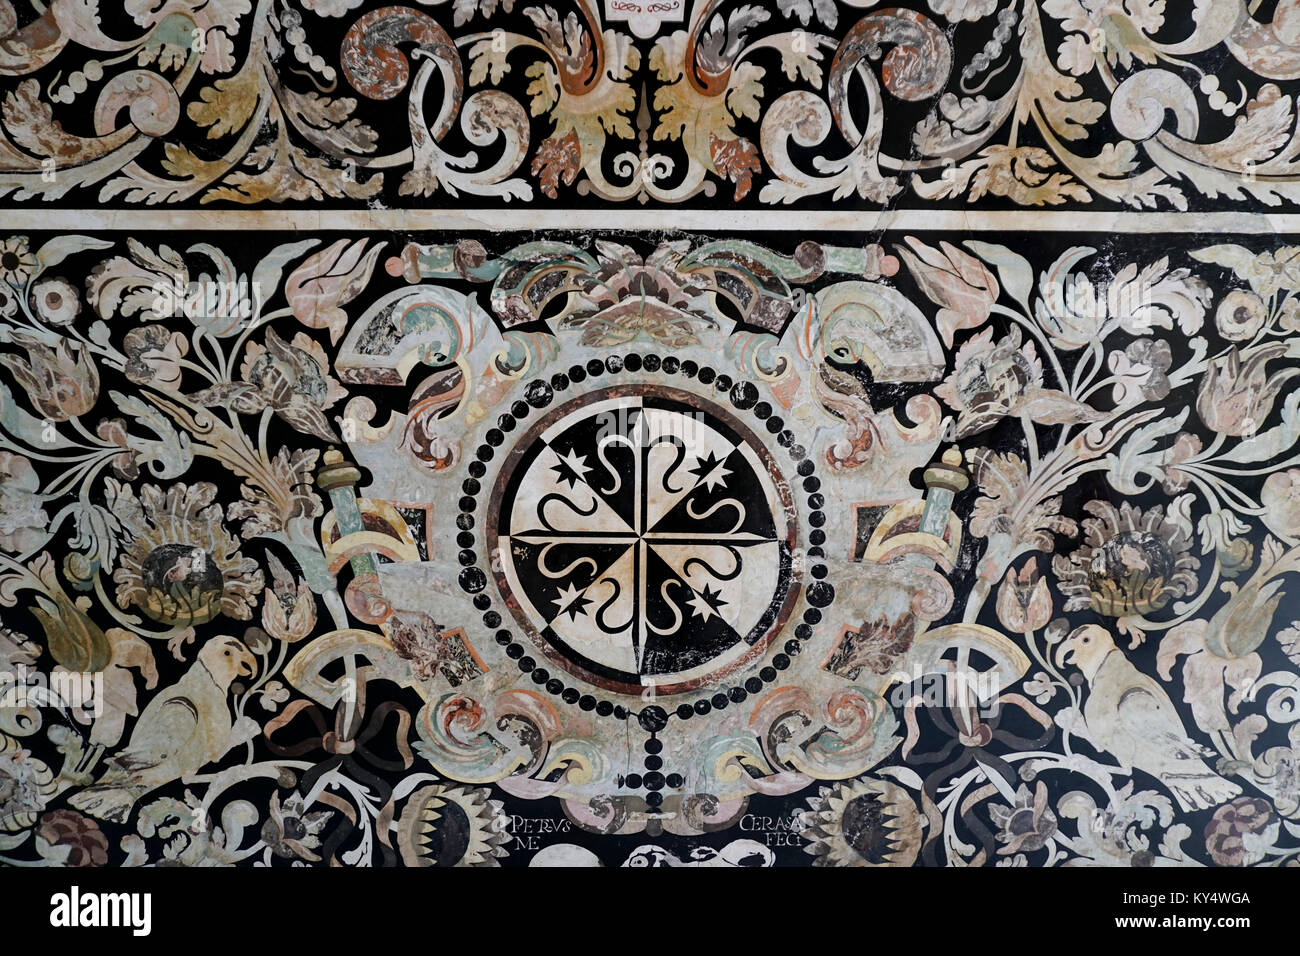 Wall with stone inlay in the National Museum of History in the Castillo de Chapultepec (Chapultepec Castle), Chapultepec Park, Mexico City, Mexico. Stock Photo